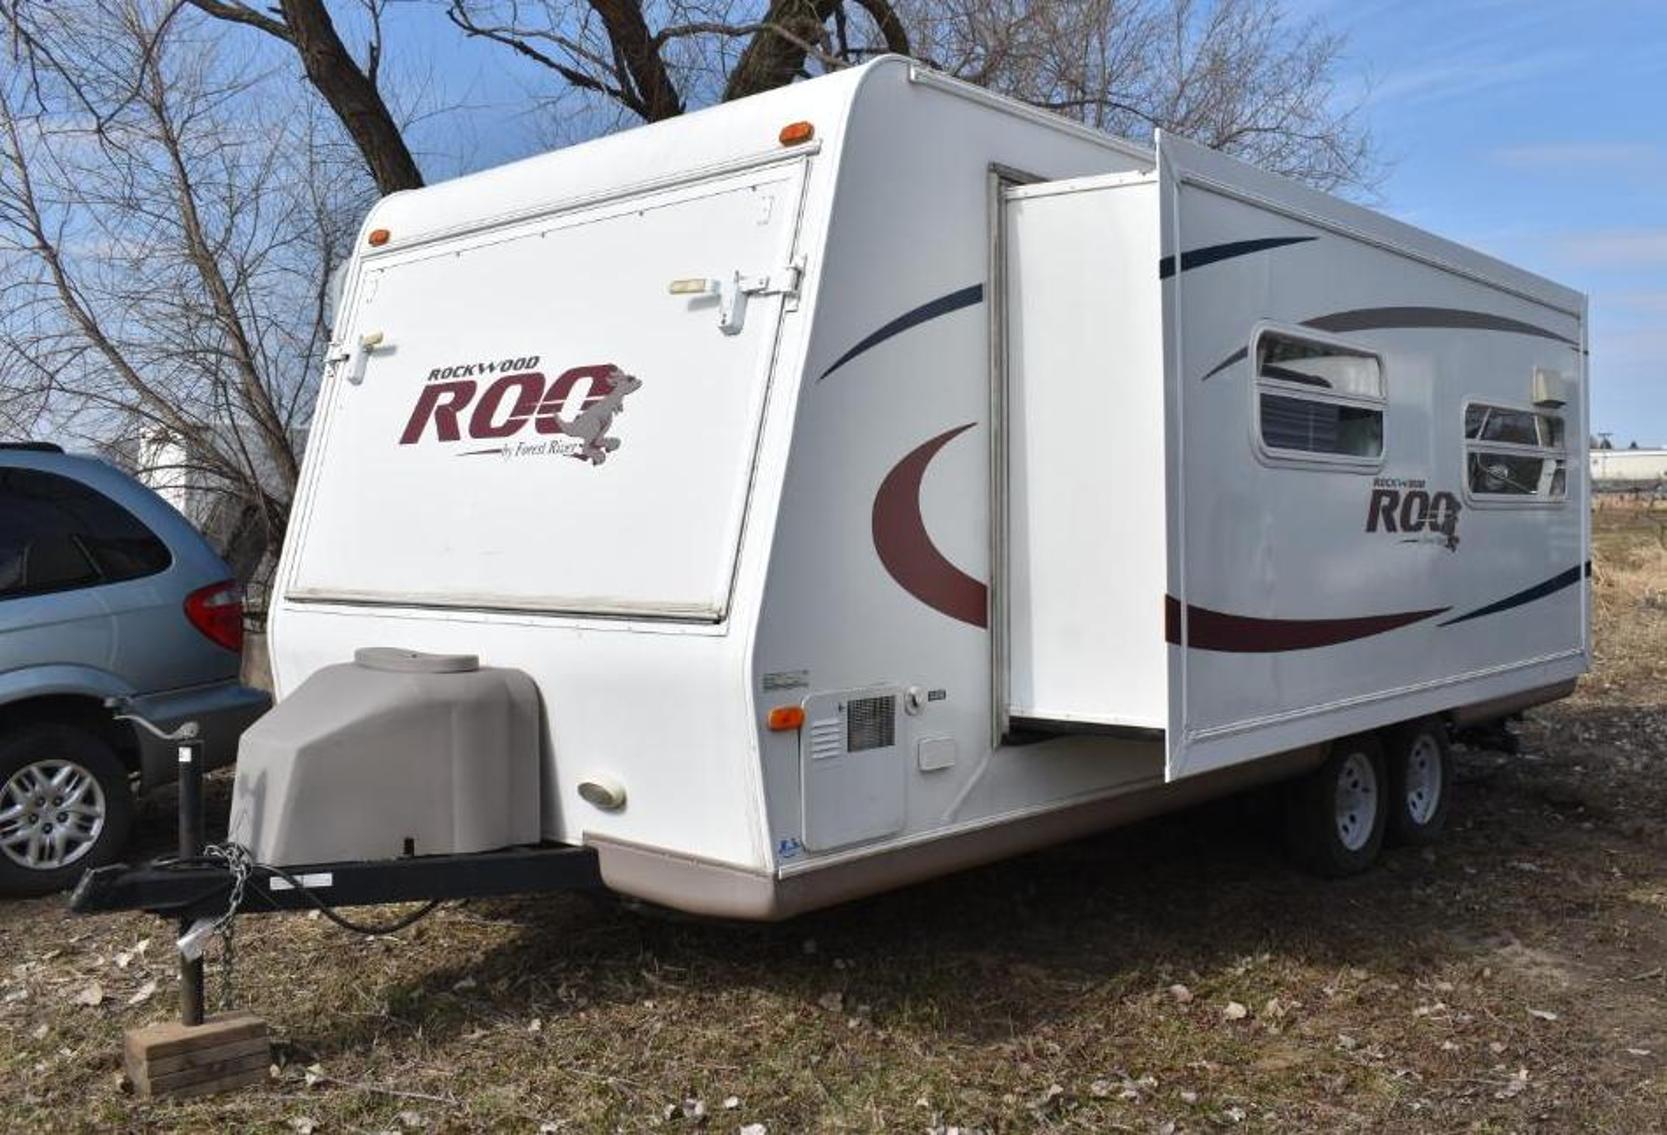 36 Units: (2) Toy Haulers, (1) Motorhome, (3) Vehicles, (1) Pickup Topper, (13) 5th Wheel Trailers, & (16) Travel Trailers